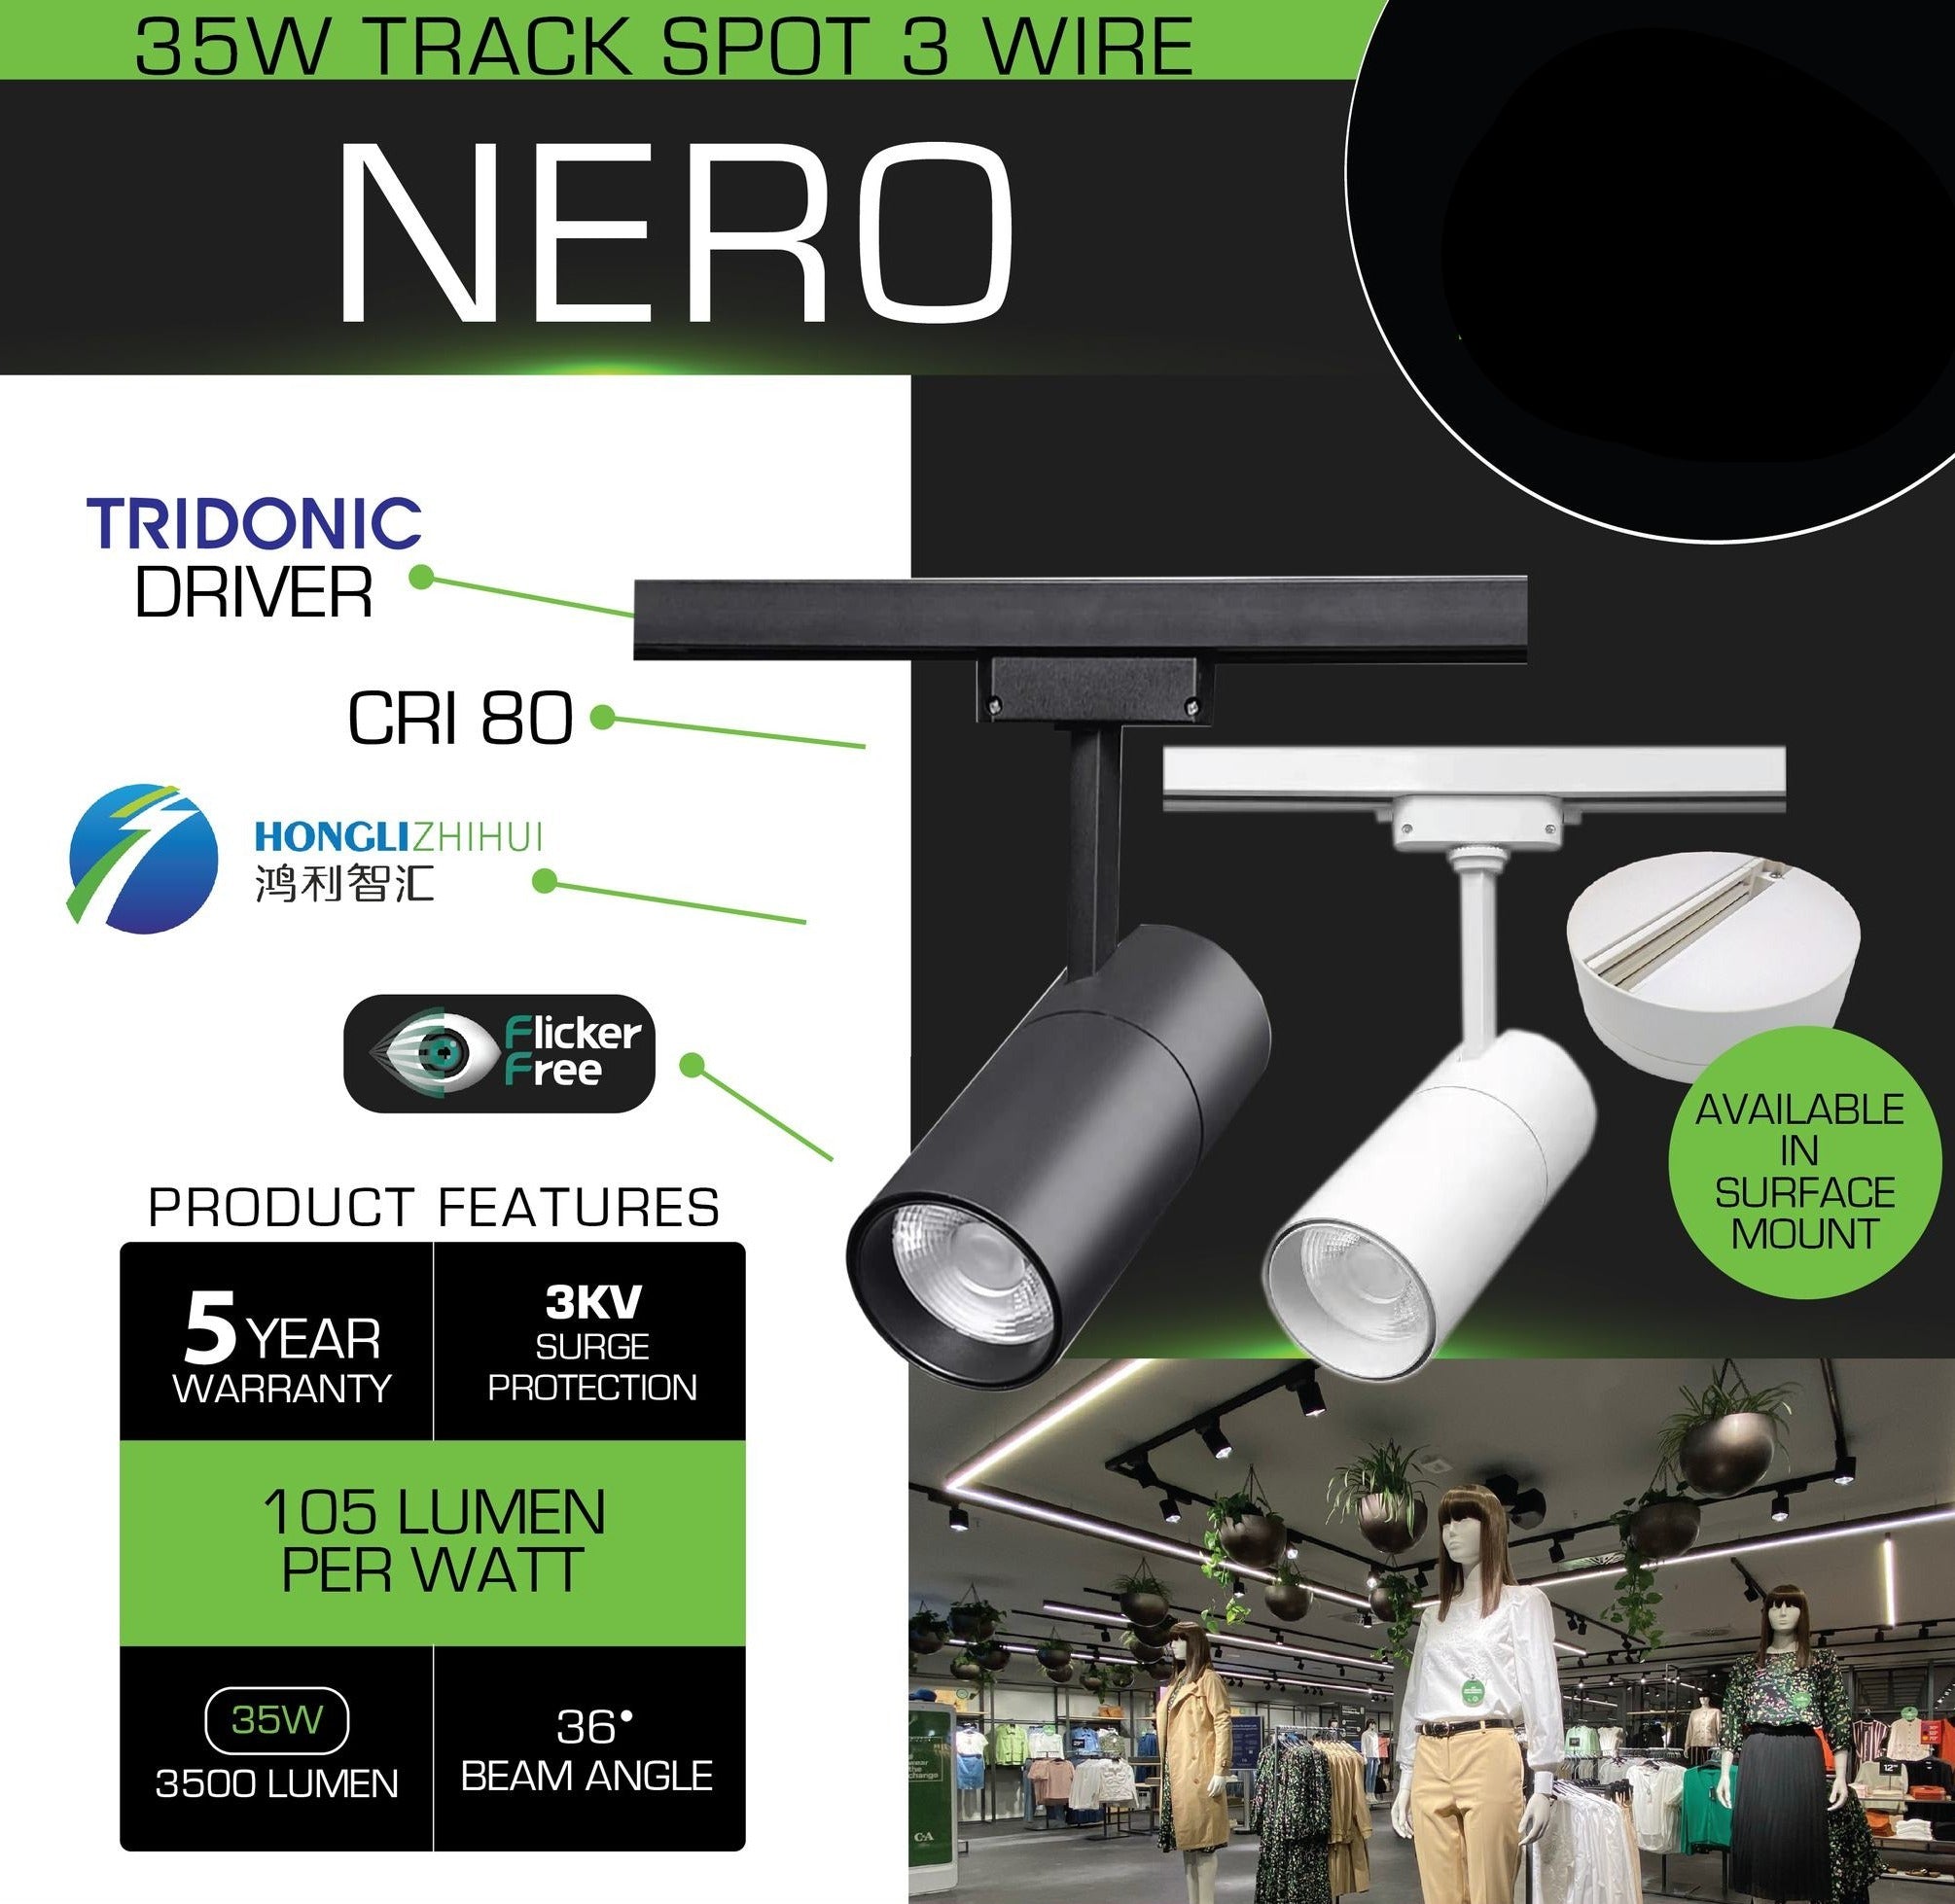 Nero 35W 3 Wire LED Track Spot - Future Light - LED Lights South Africa